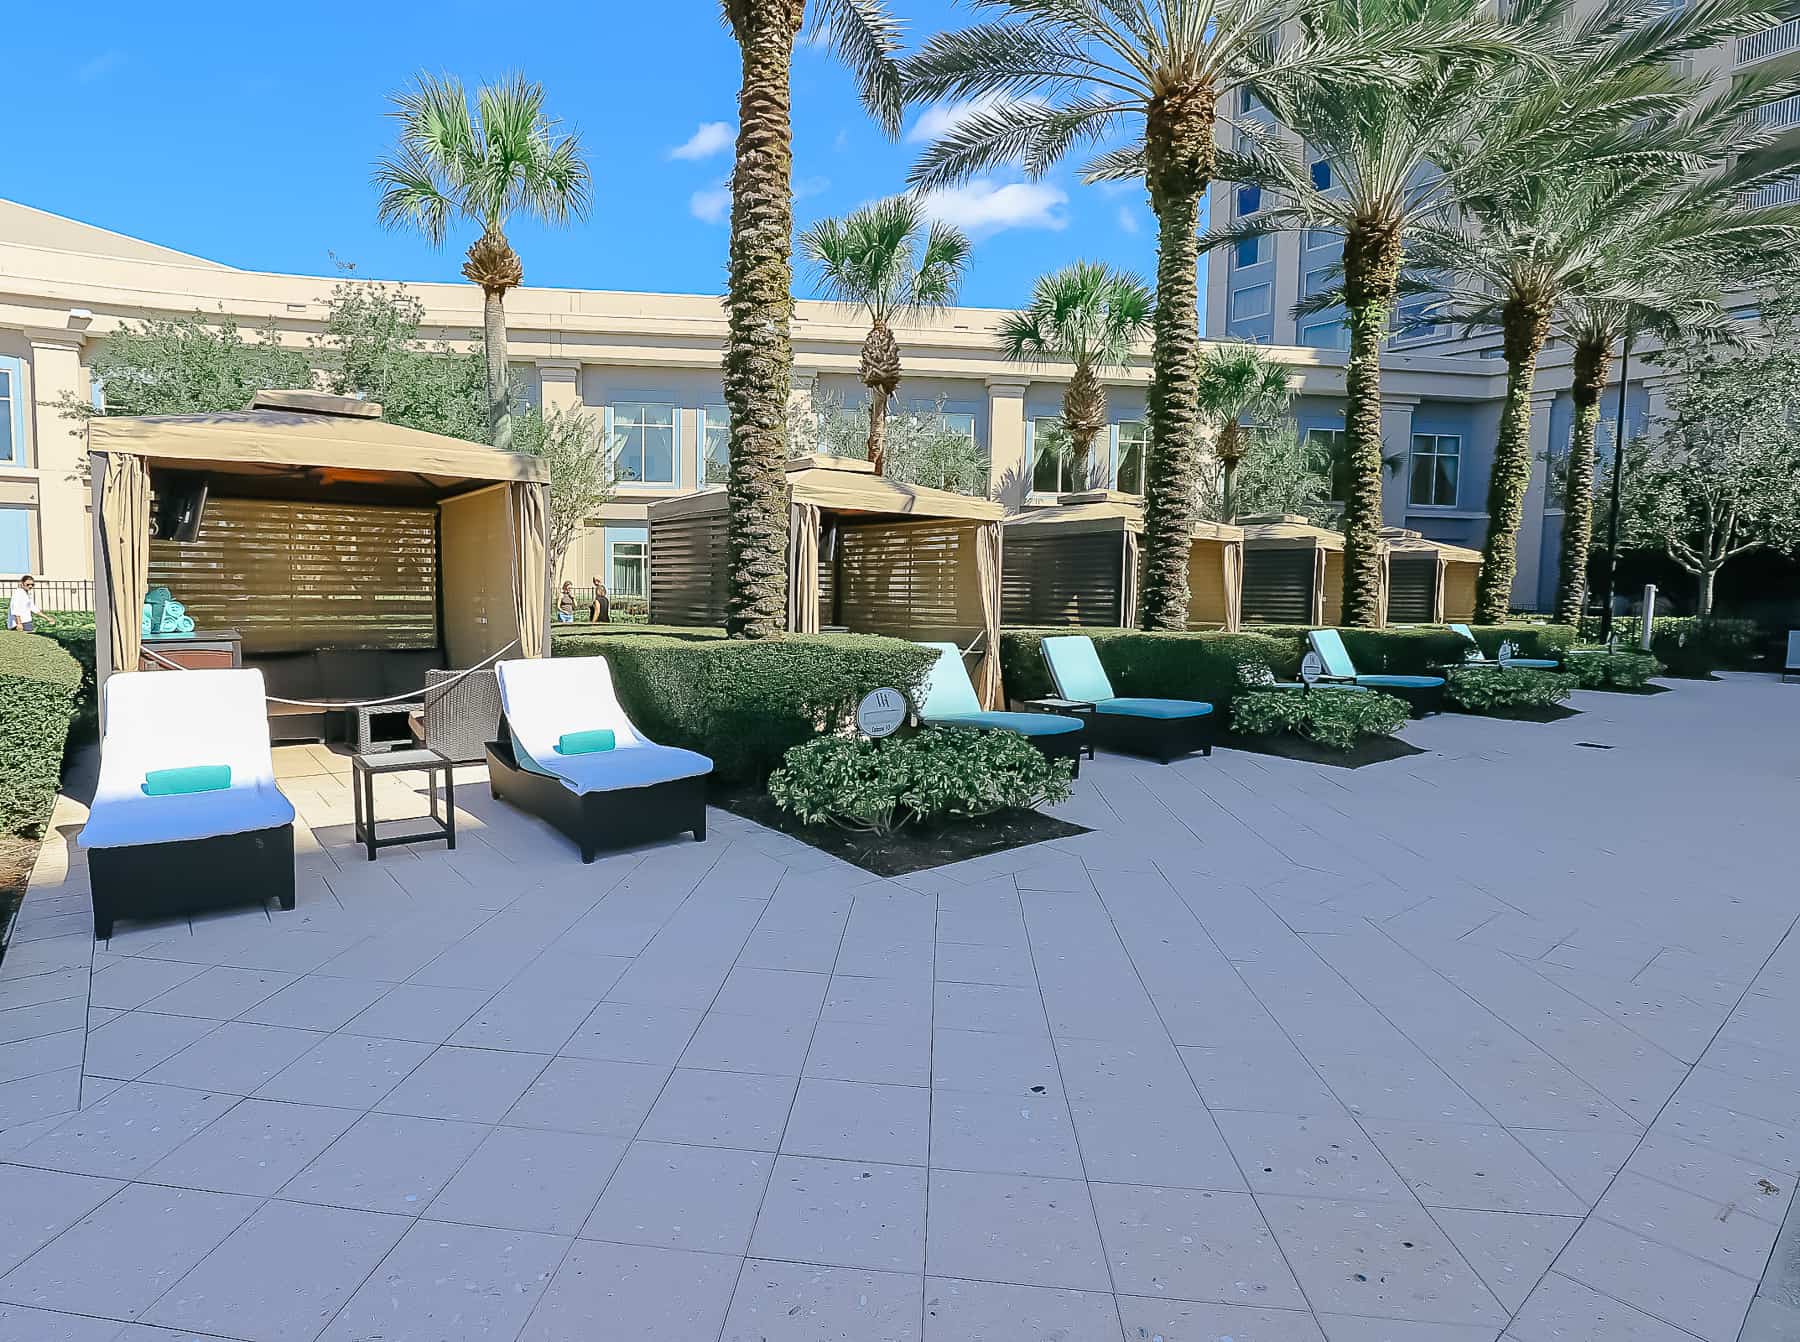 a row of cabanas that guests can rent 